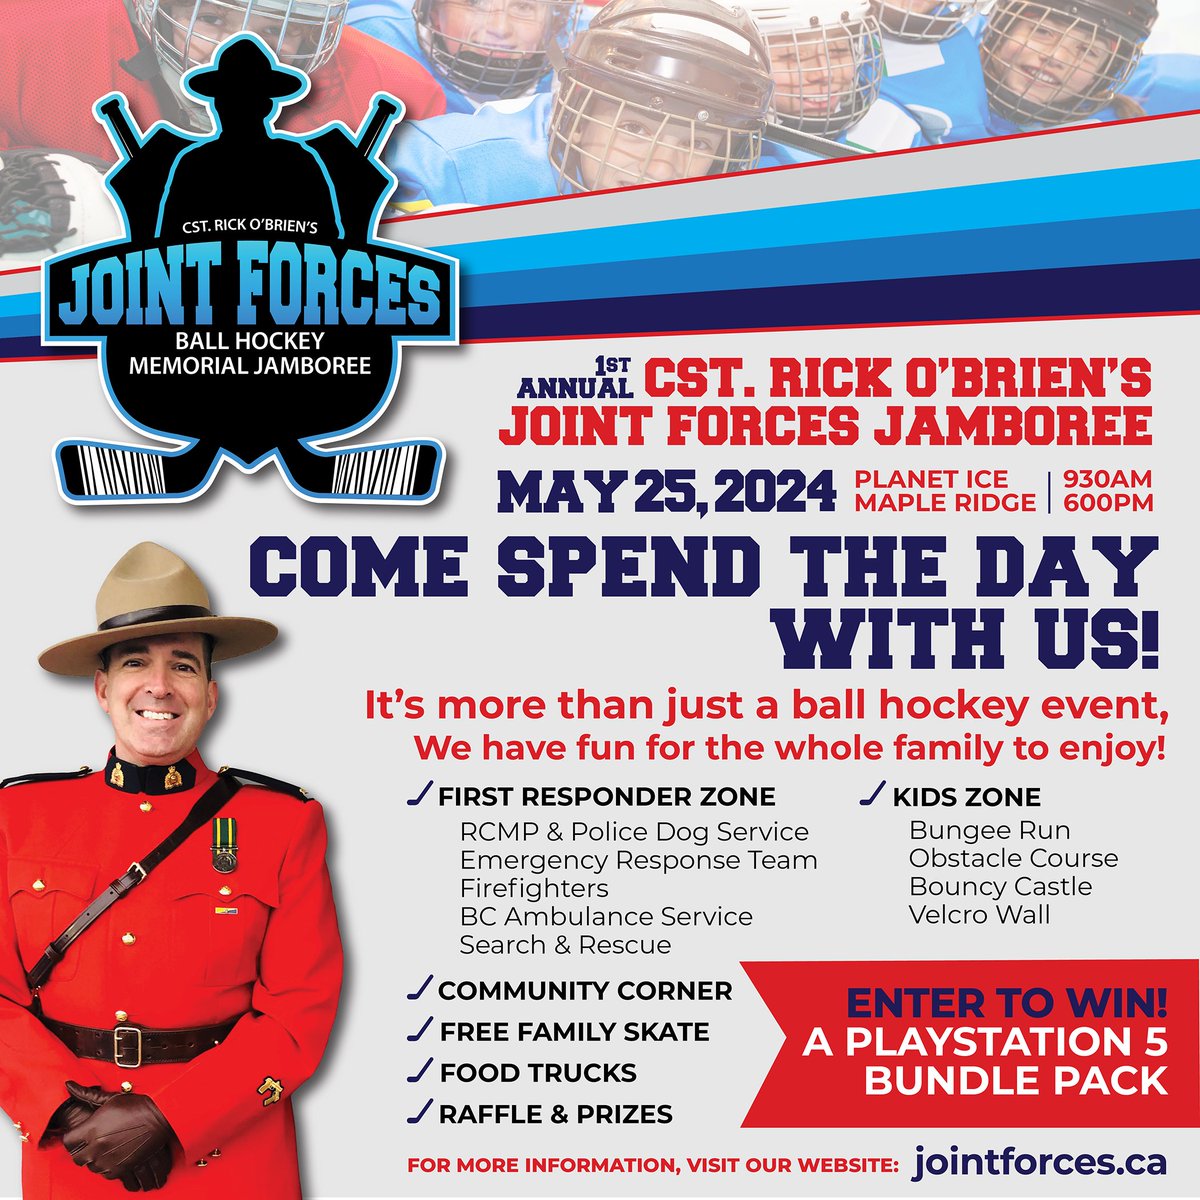 One month away from the Cst. Rick O'Brien Joint Forces Jamboree! Bring the family and join us at Planet Ice, Maple Ridge on May 25th!